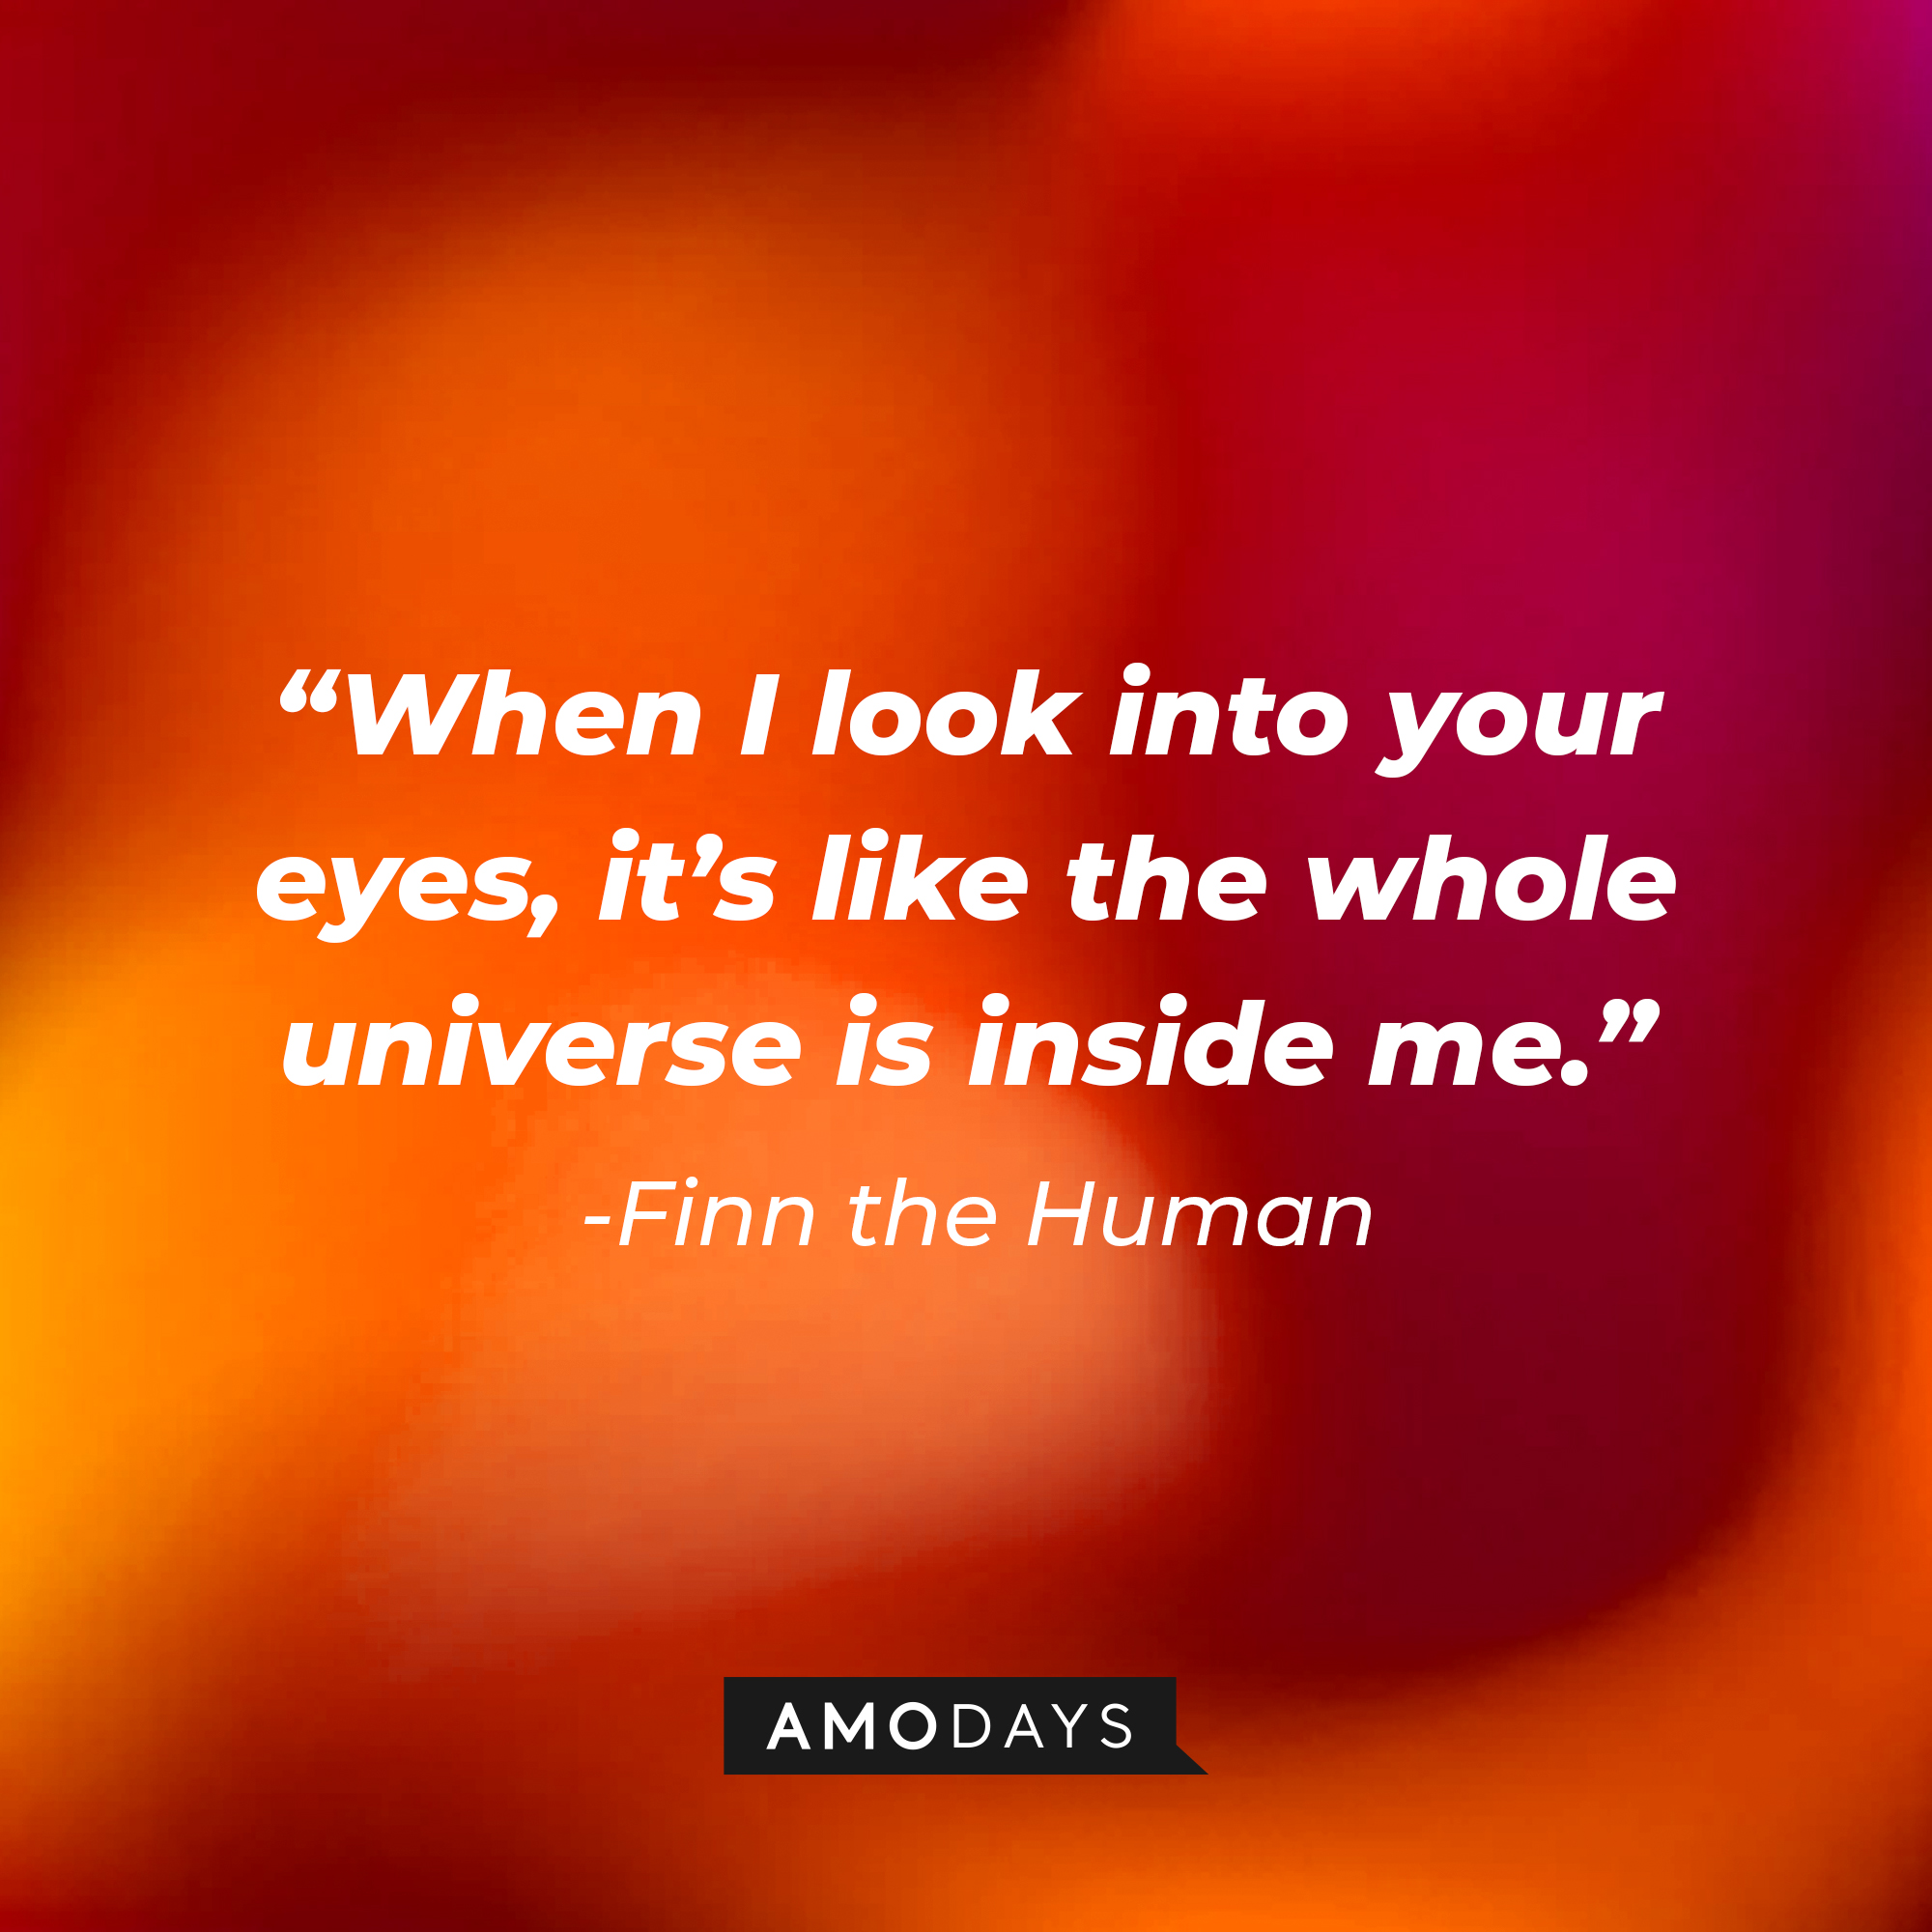 Finn the Human’s quote: “When I look into your eyes, it’s like the whole universe is inside me.” | Source: AmoDays